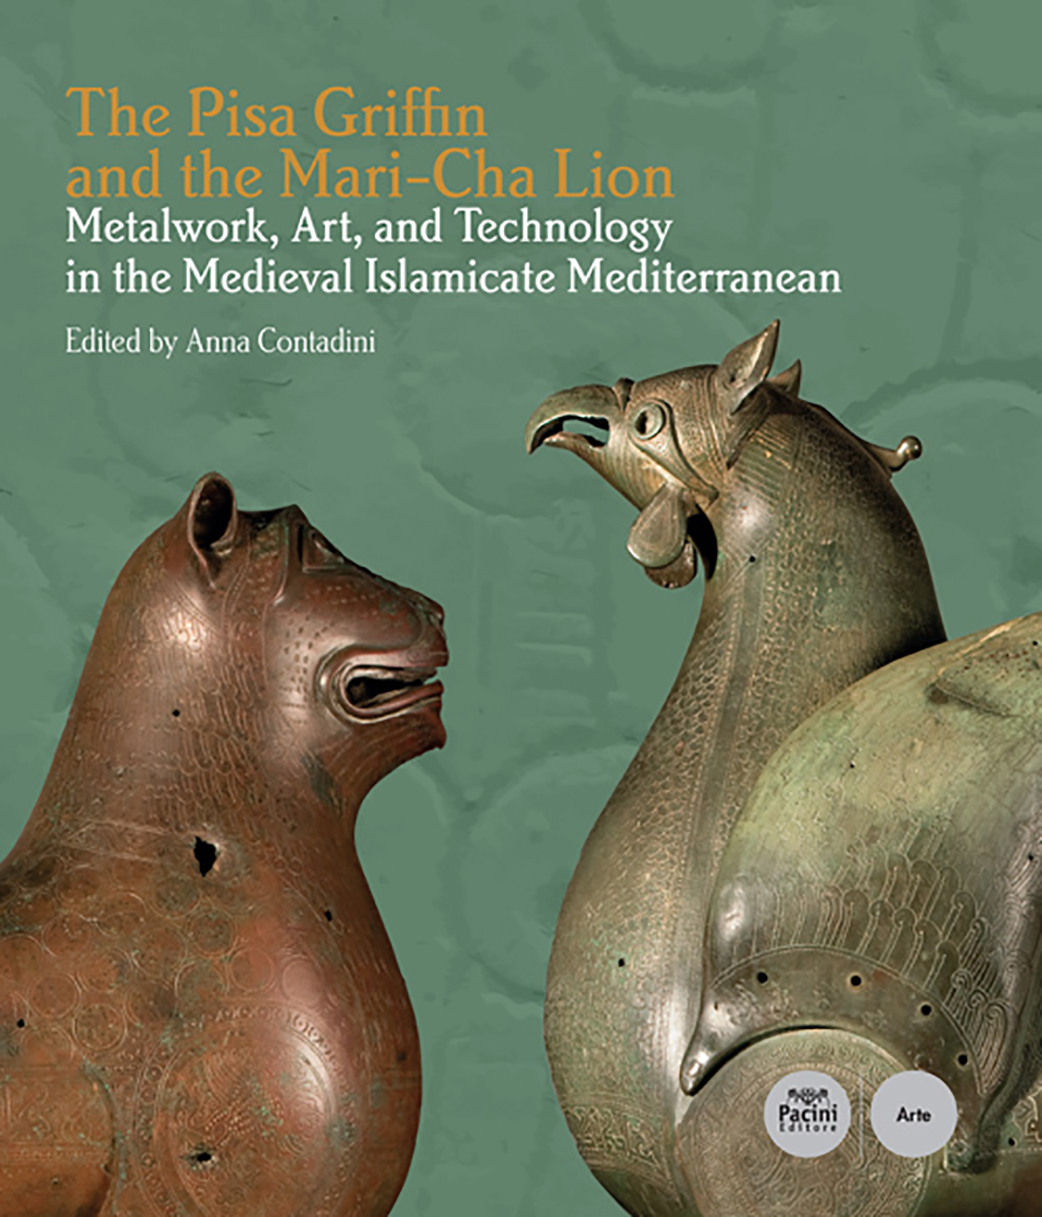 The Circulation of Middle Eastern Objects in the pre-modern period and their interpretation within new cultural settings